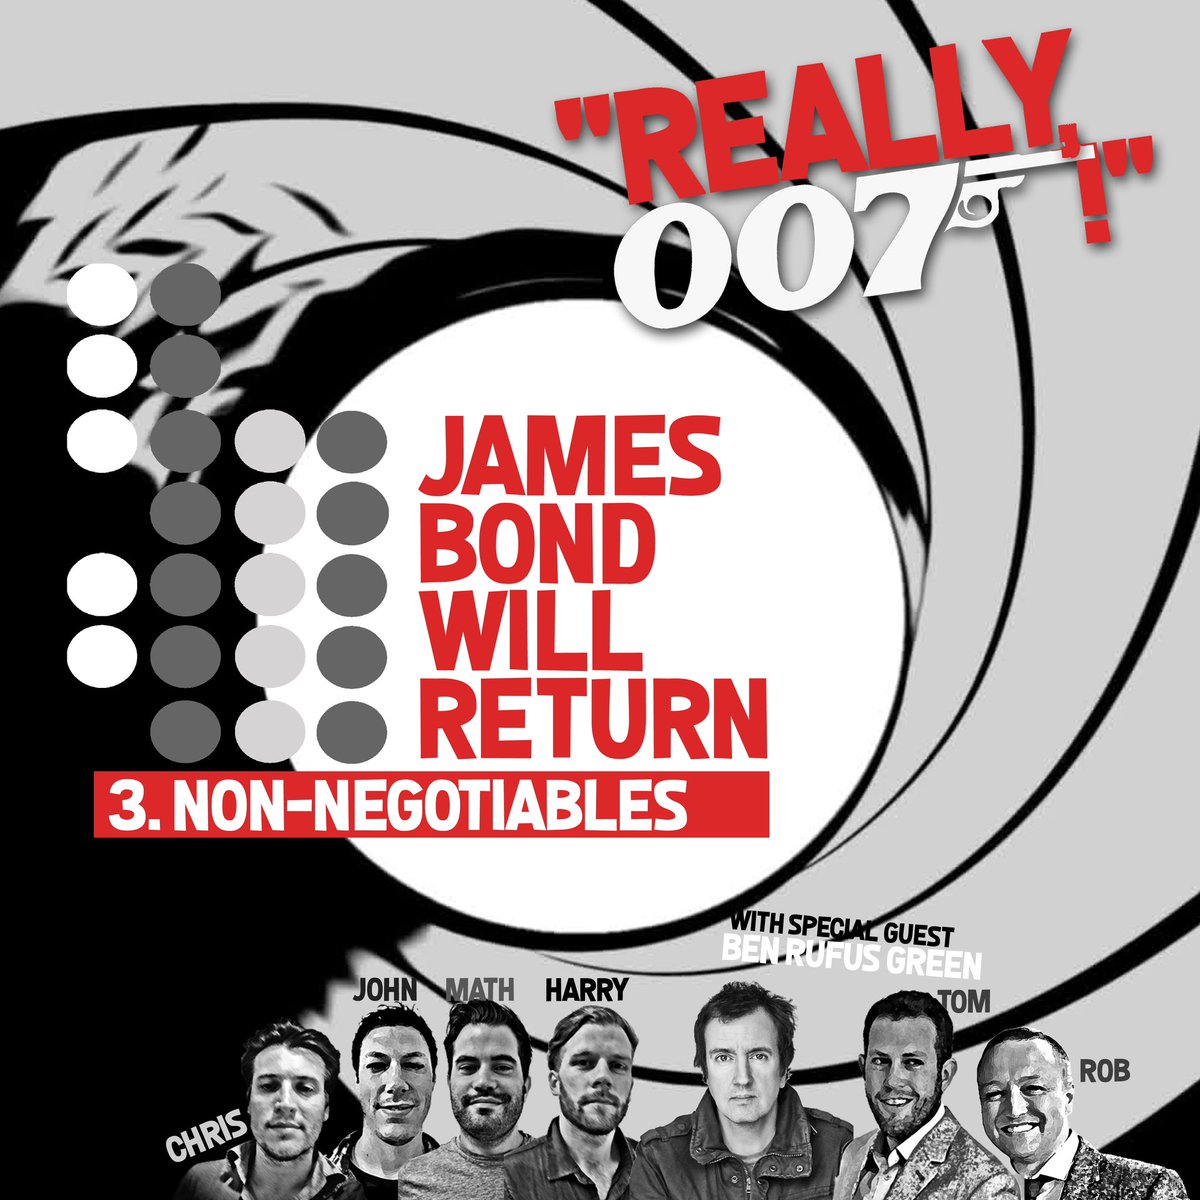 Comedian Ben Rufus Green (@greensville) joins us for our latest look into the next #JamesBond film - all about the absolute essentials! 🍎podcasts.apple.com/gb/podcast/rea… 🎧open.spotify.com/episode/5i4JsY…